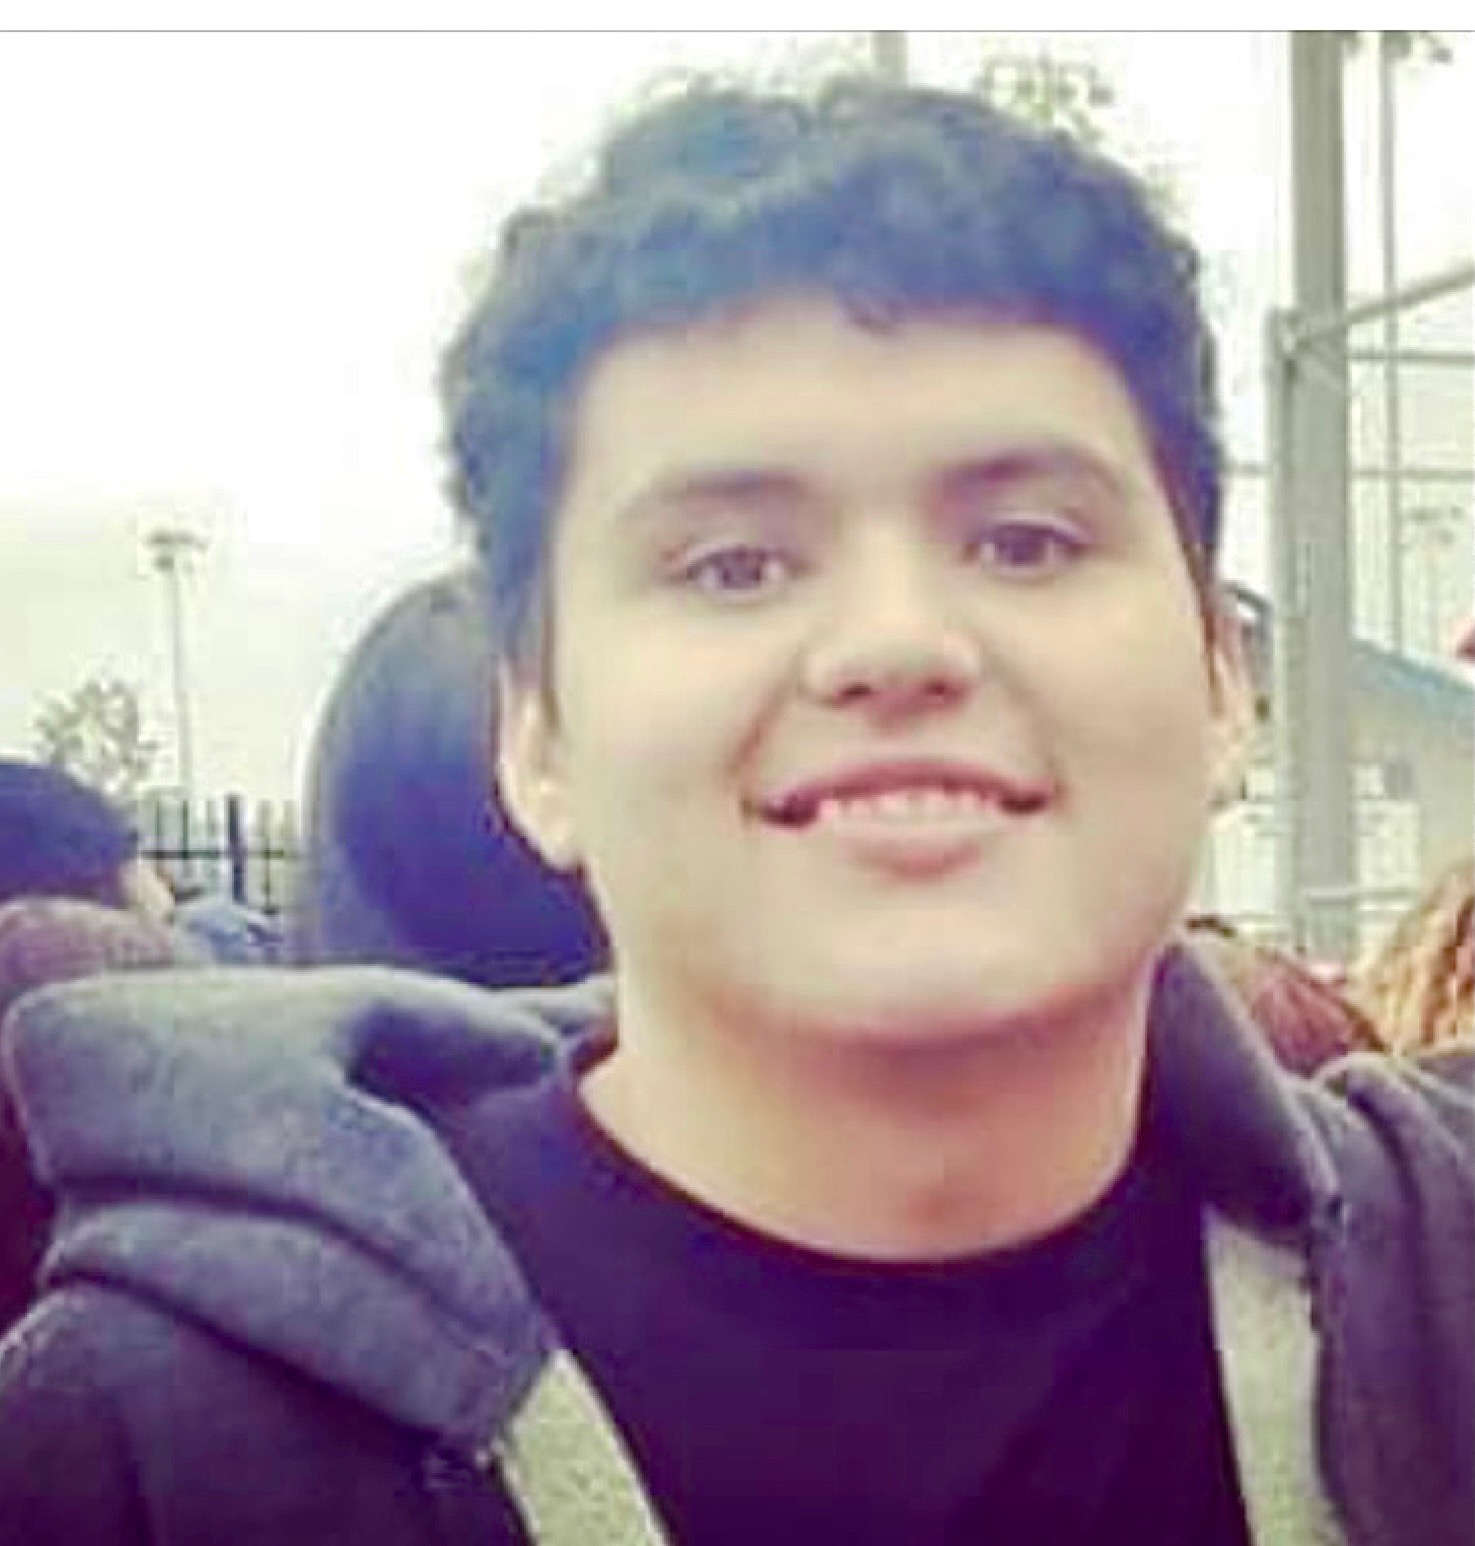 Photo of Fernando Sanchez, who died at 17 years old after taking a pill laced with fentanyl.